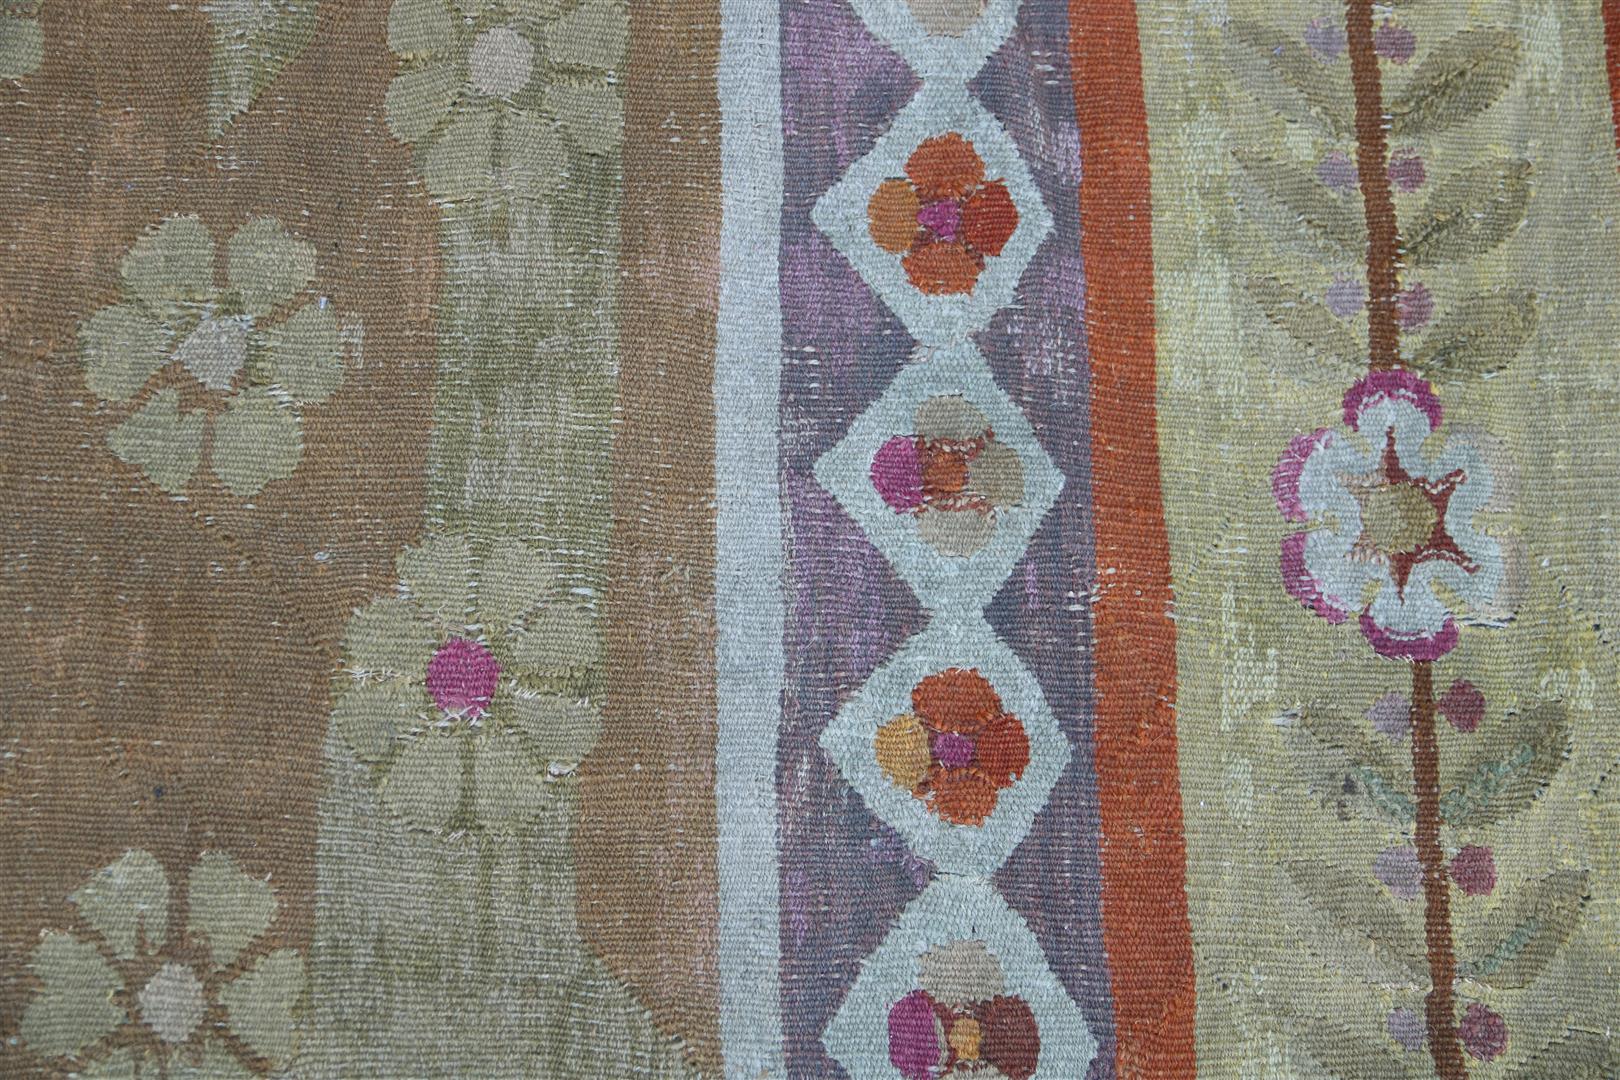 Antique woven tapestry - Image 10 of 10